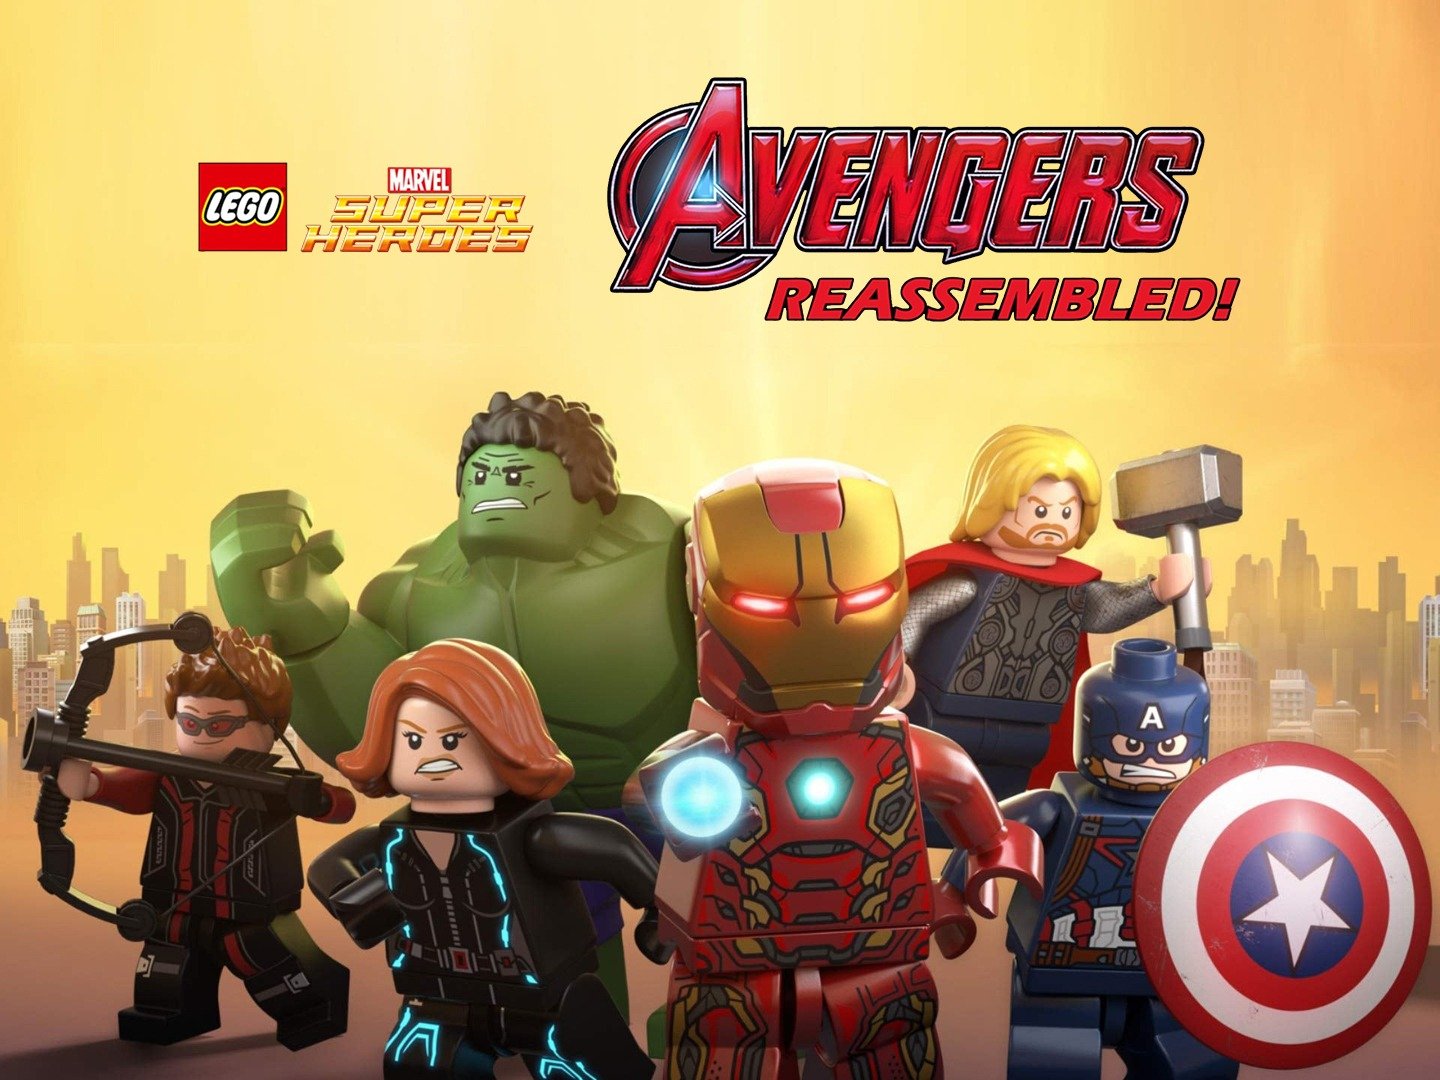 Marvel Super Heroes: Avengers Reassembled - Rotten Tomatoes